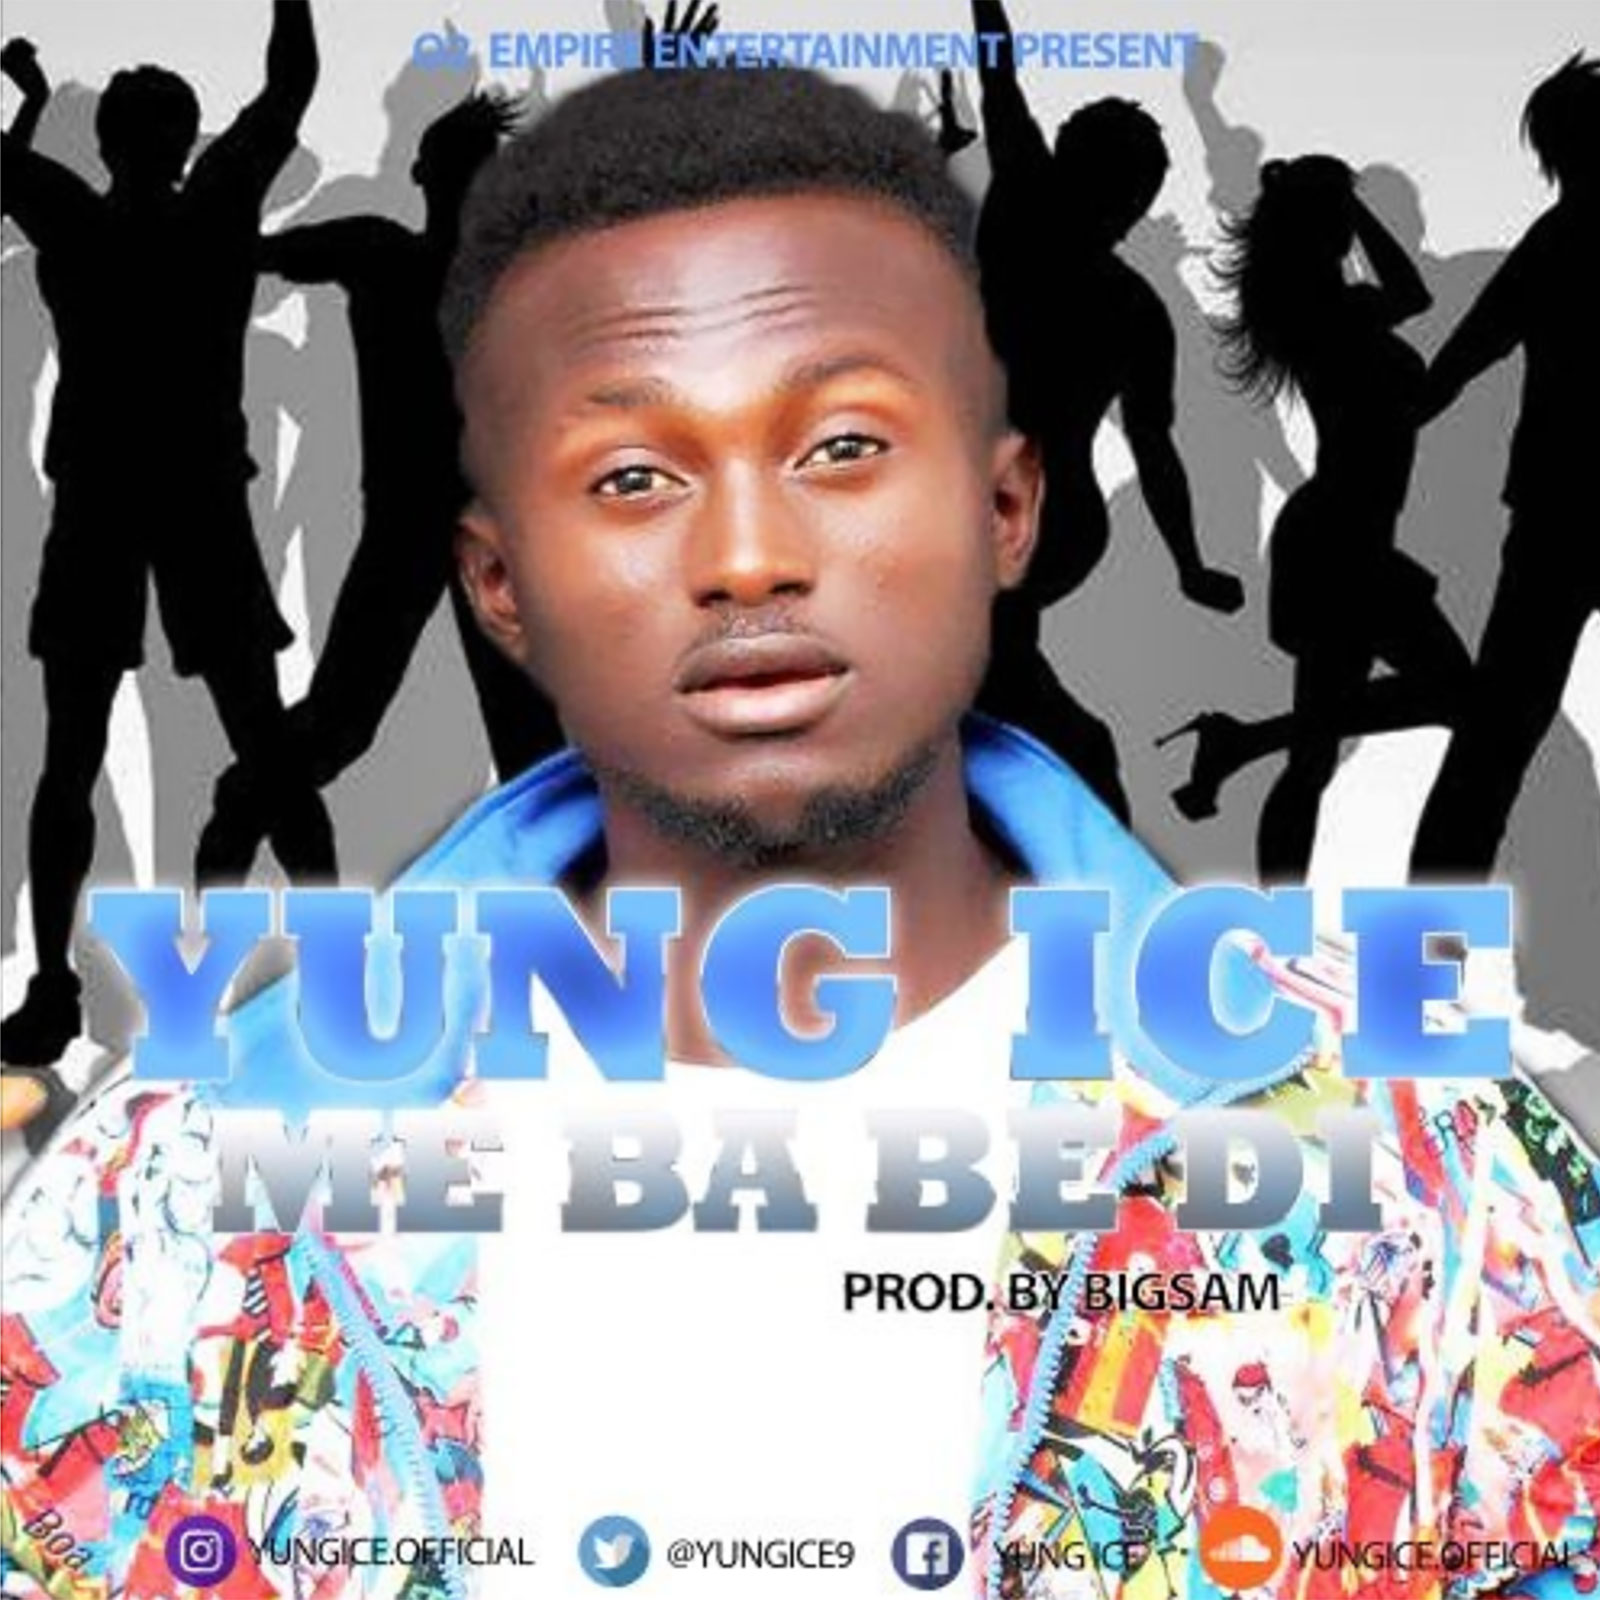 Me Ba Be Di by Yung Ice